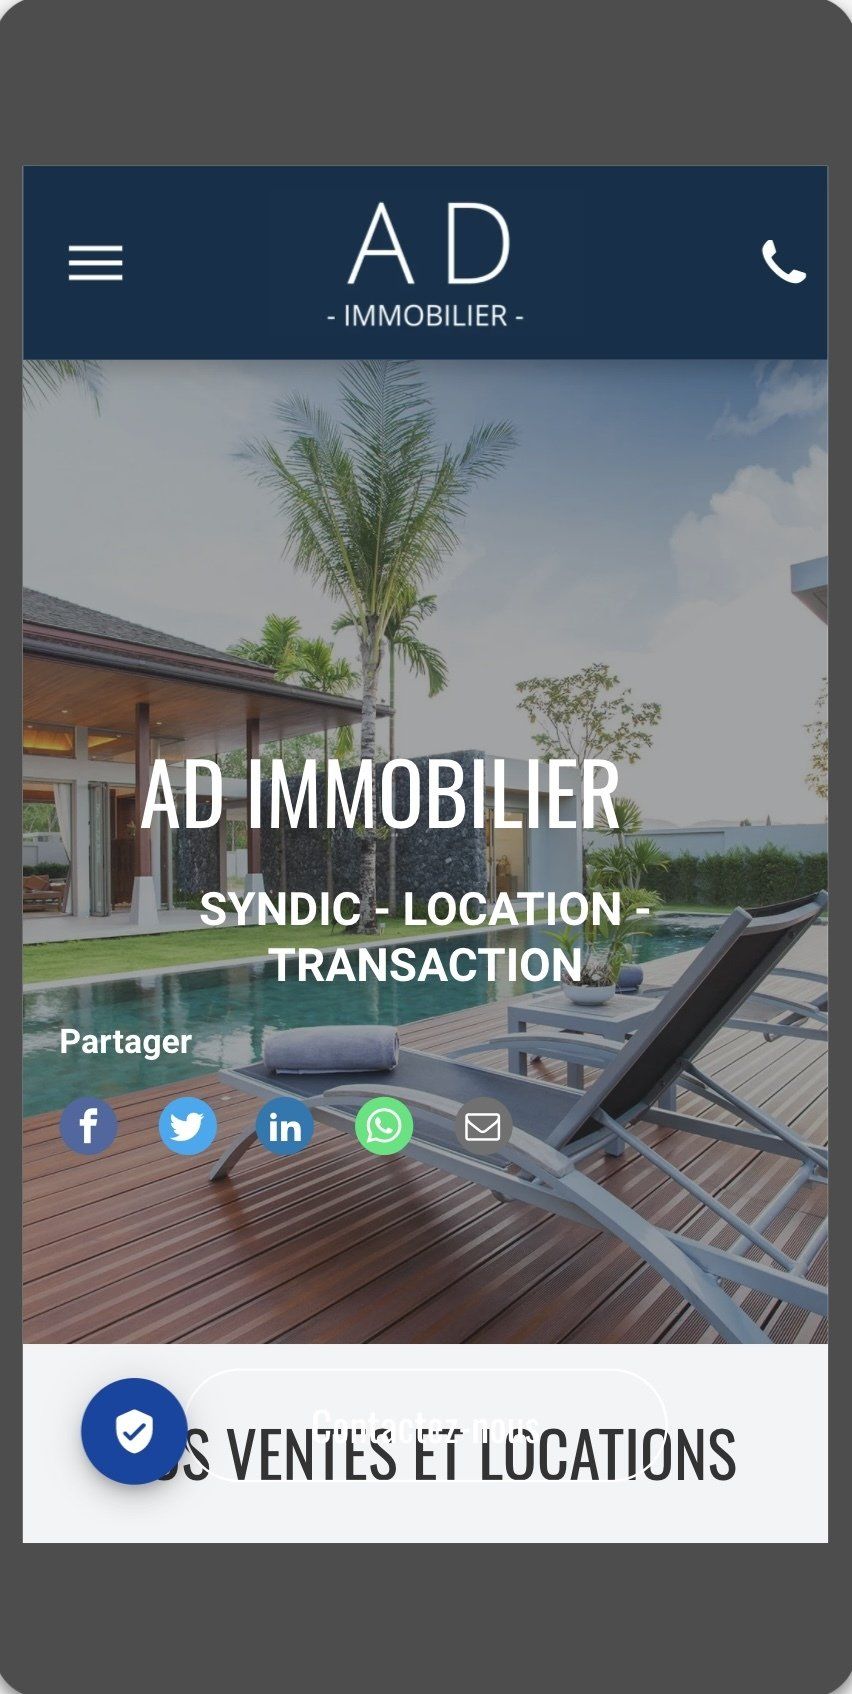 AD IMMOBILIER